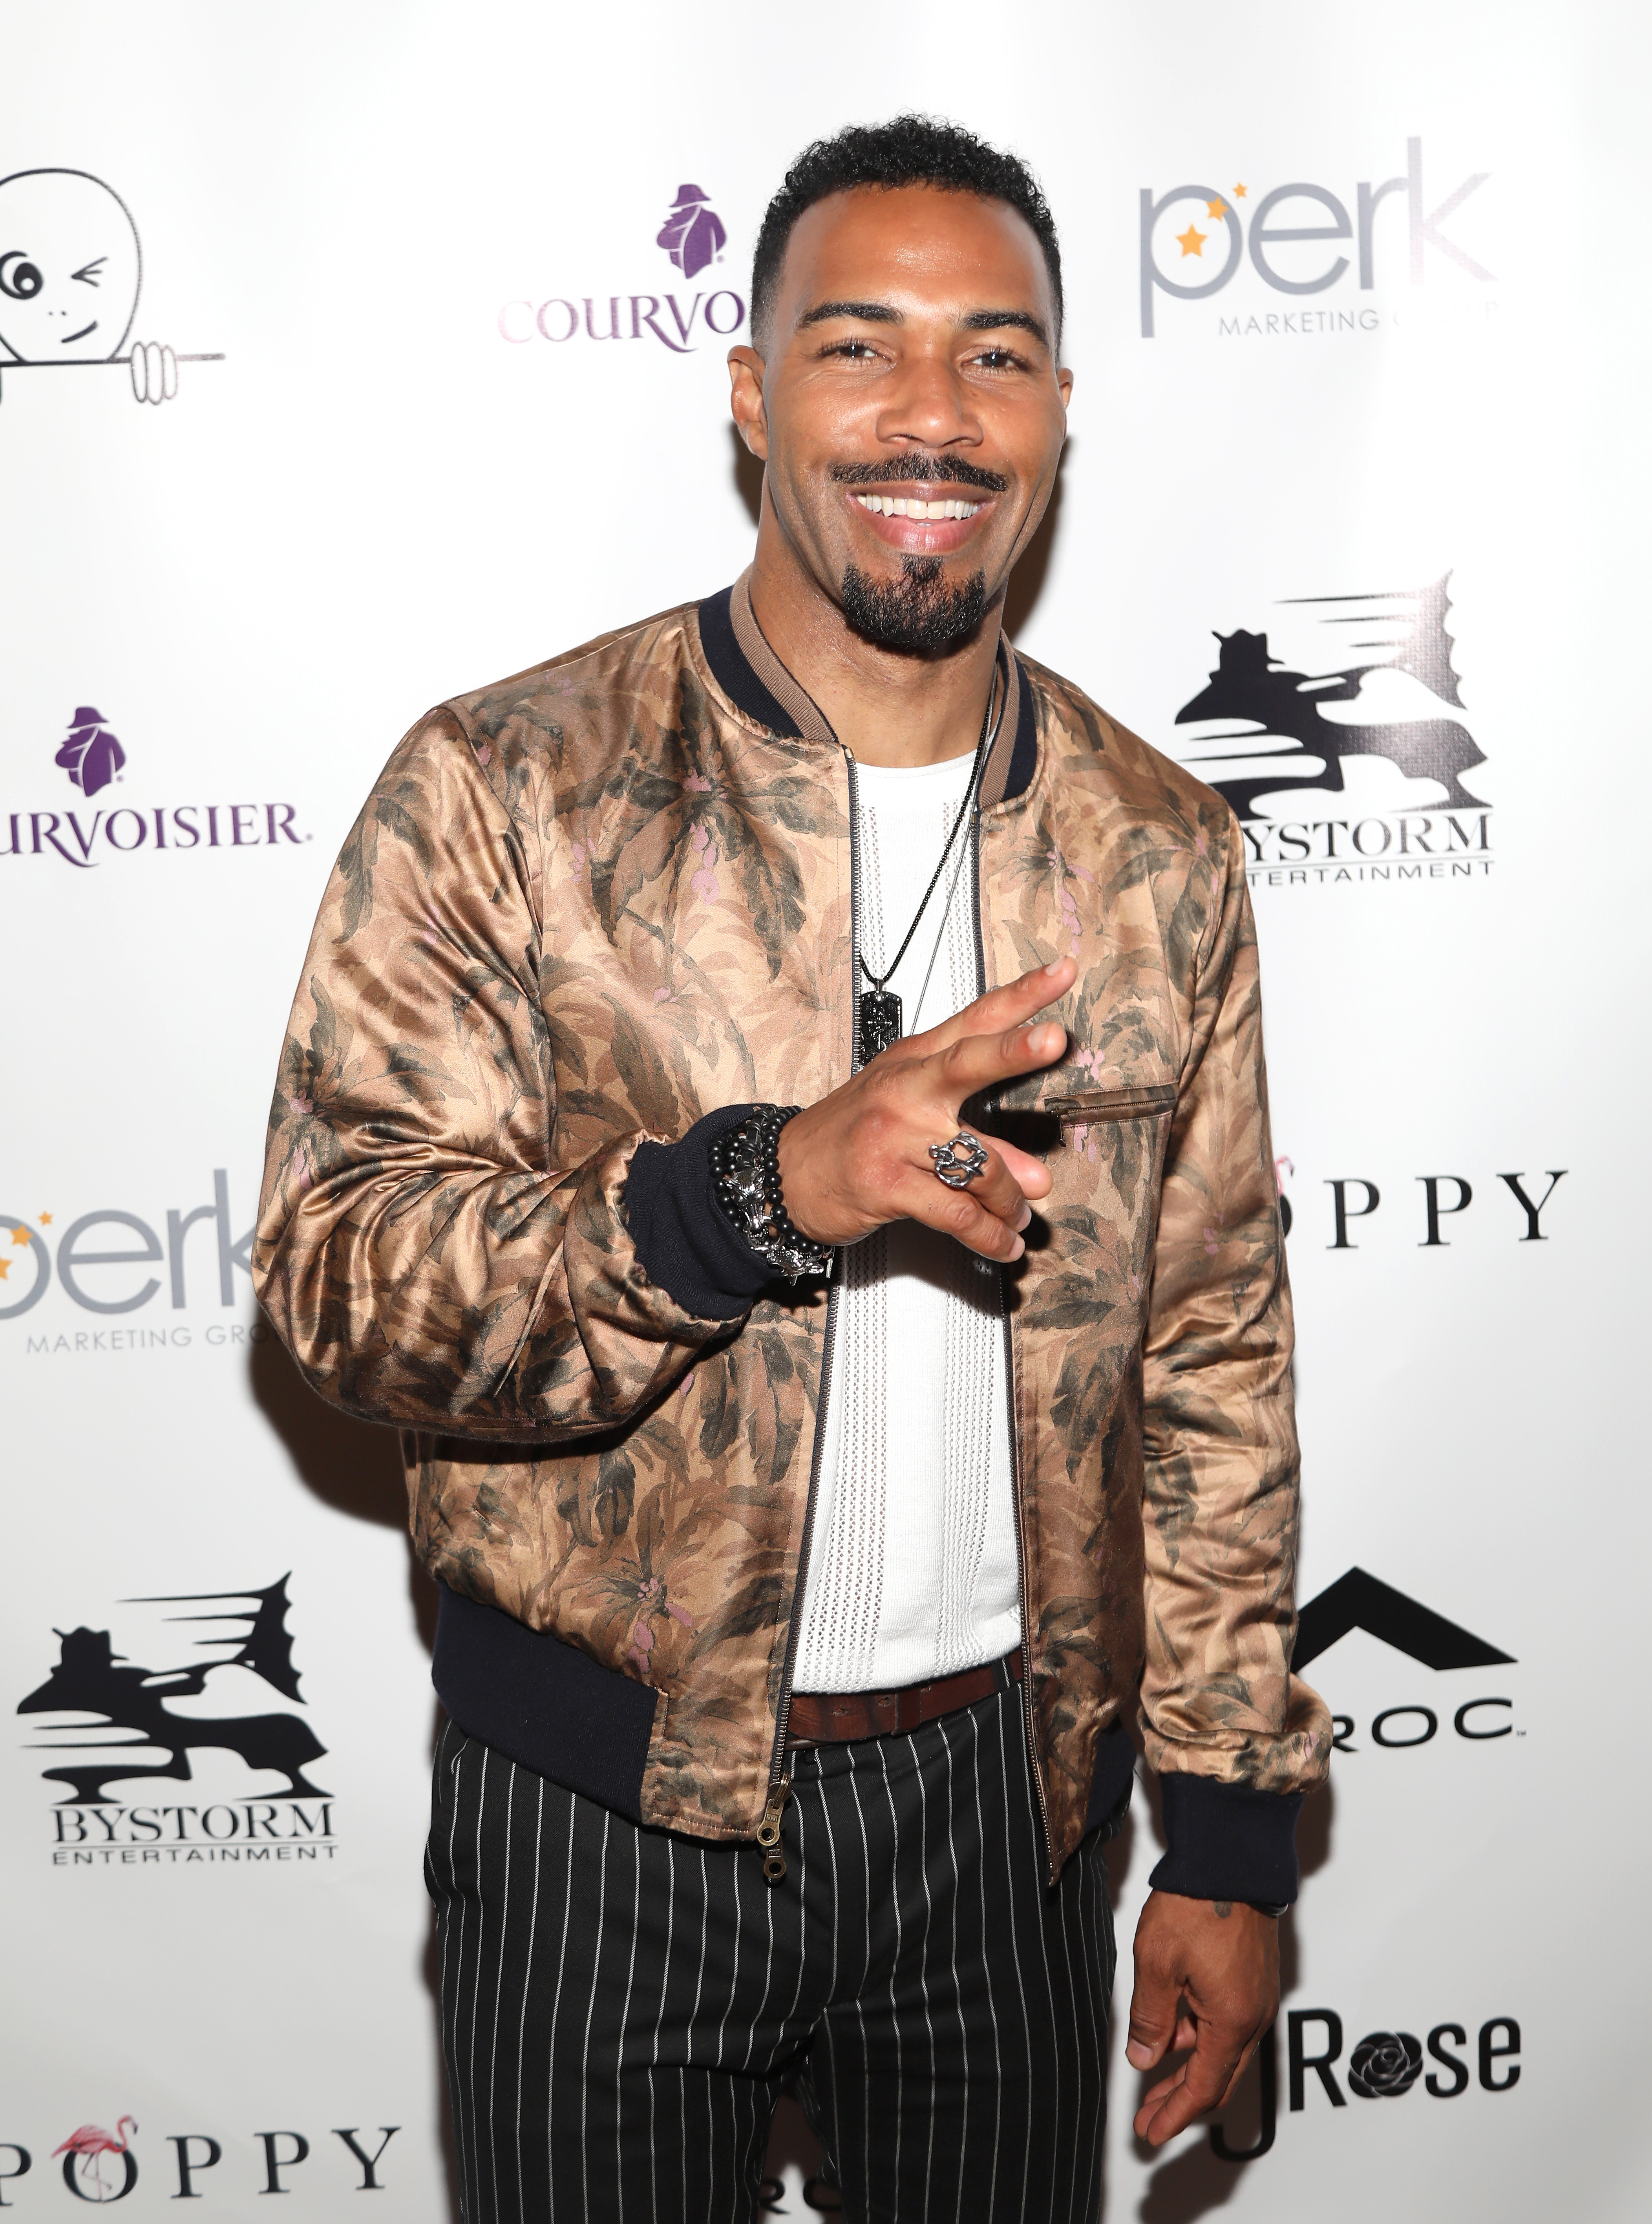 Omari Hardwick attends The 8th Annual Mark Pitts & Bystorm Ent Post BET Awards Party Powered By Ciroc on June 24, 2018, in Los Angeles, California. | Source: Getty Images